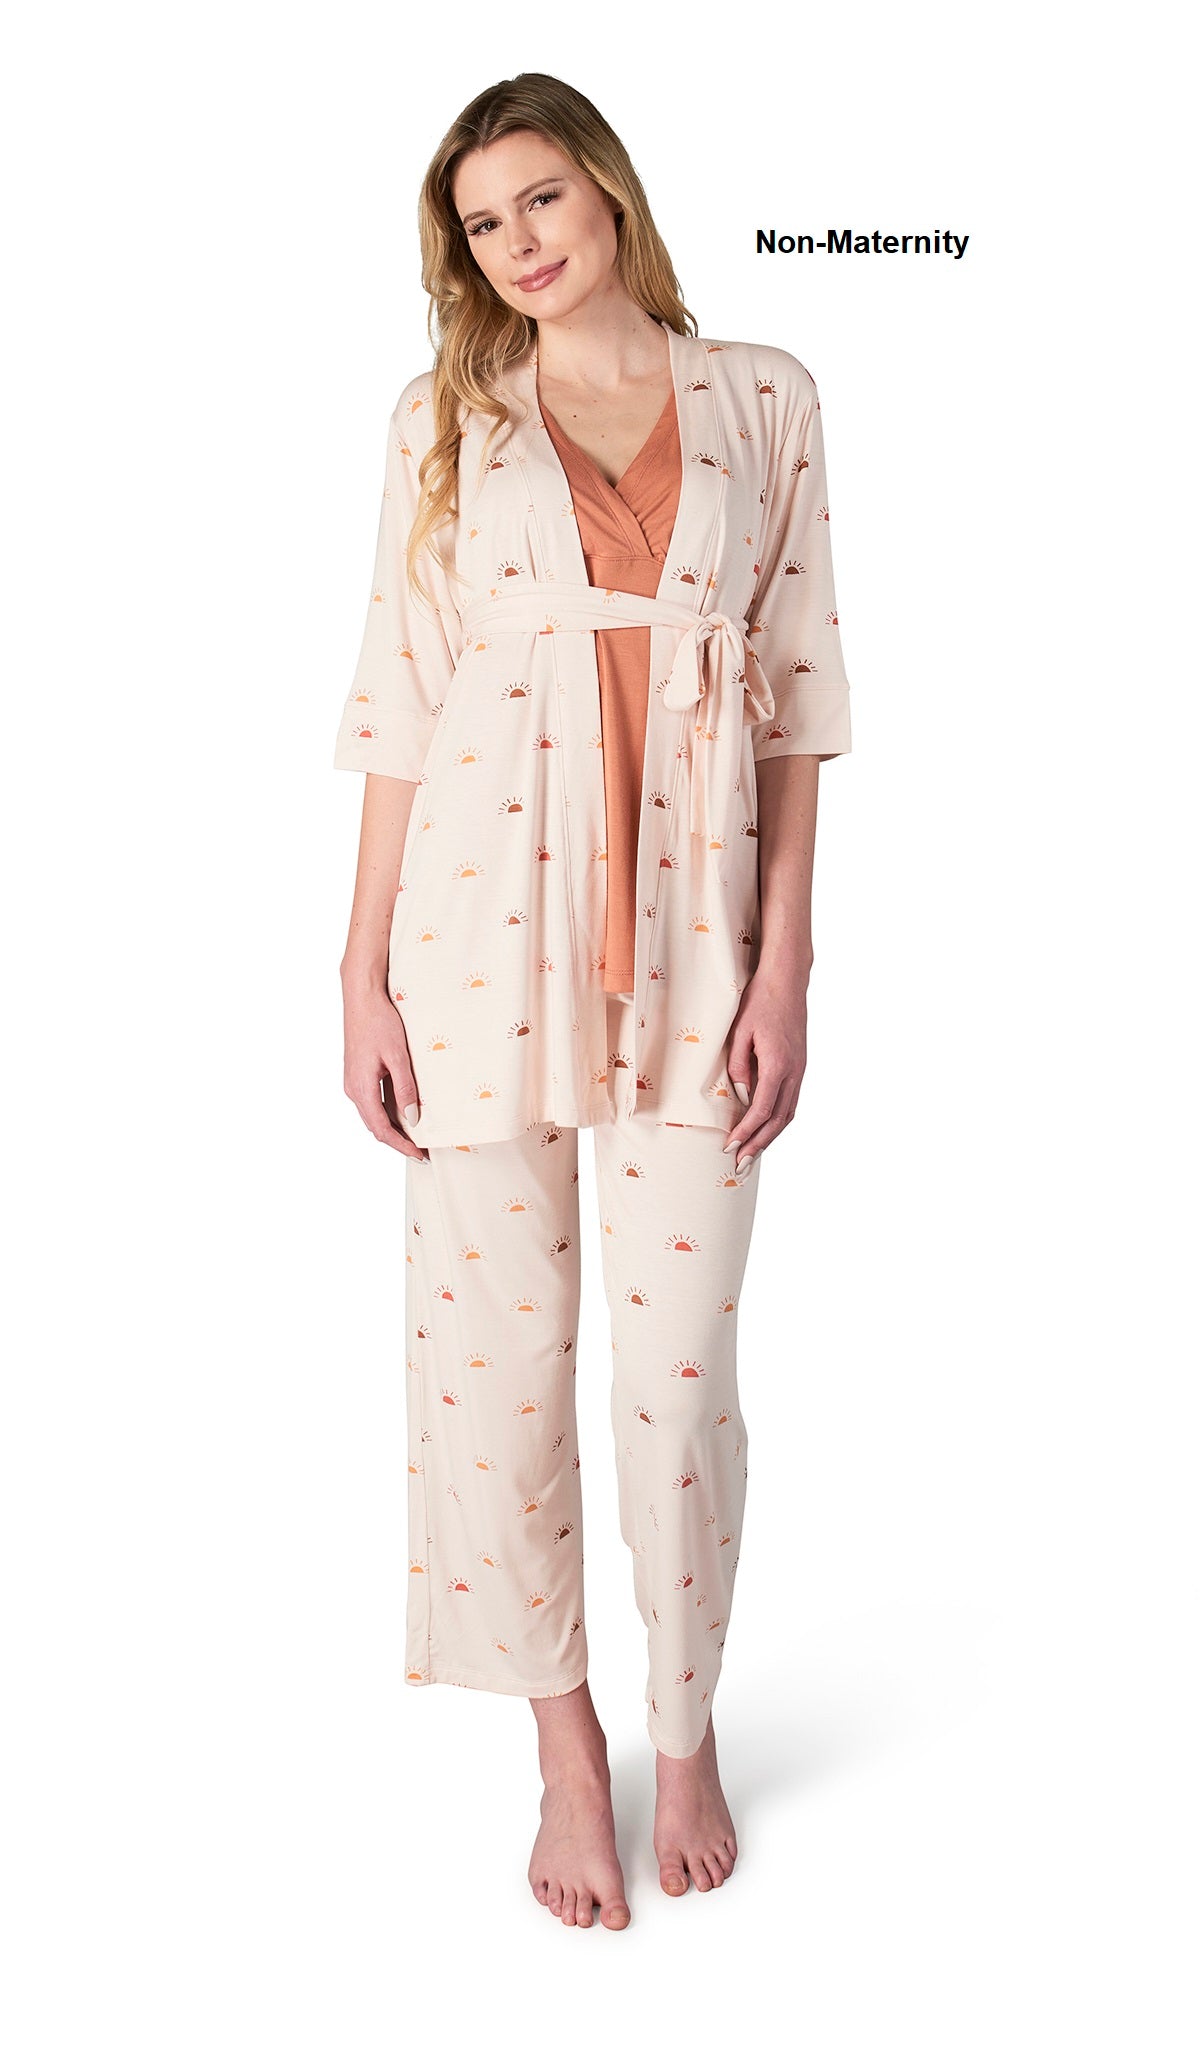 Sunrise Analise 3-Piece Set. Woman wearing 3/4 sleeve robe, tank top and pant as non-maternity.